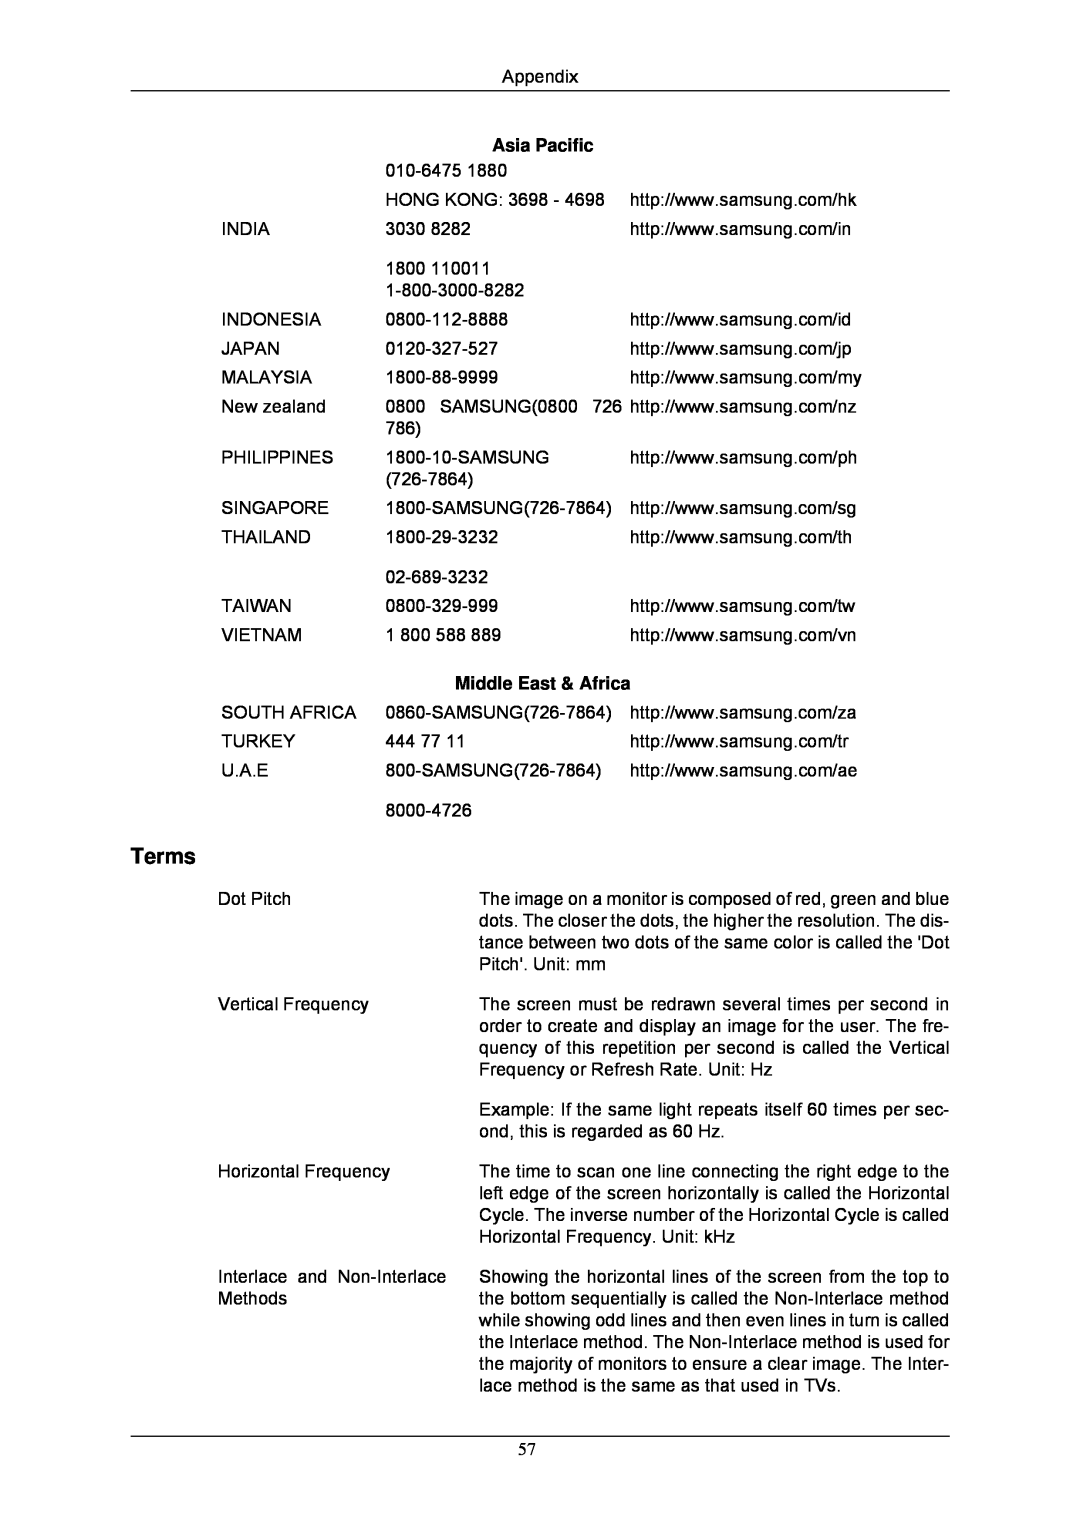 Samsung 2433BW user manual Terms, Asia Pacific, Middle East & Africa 